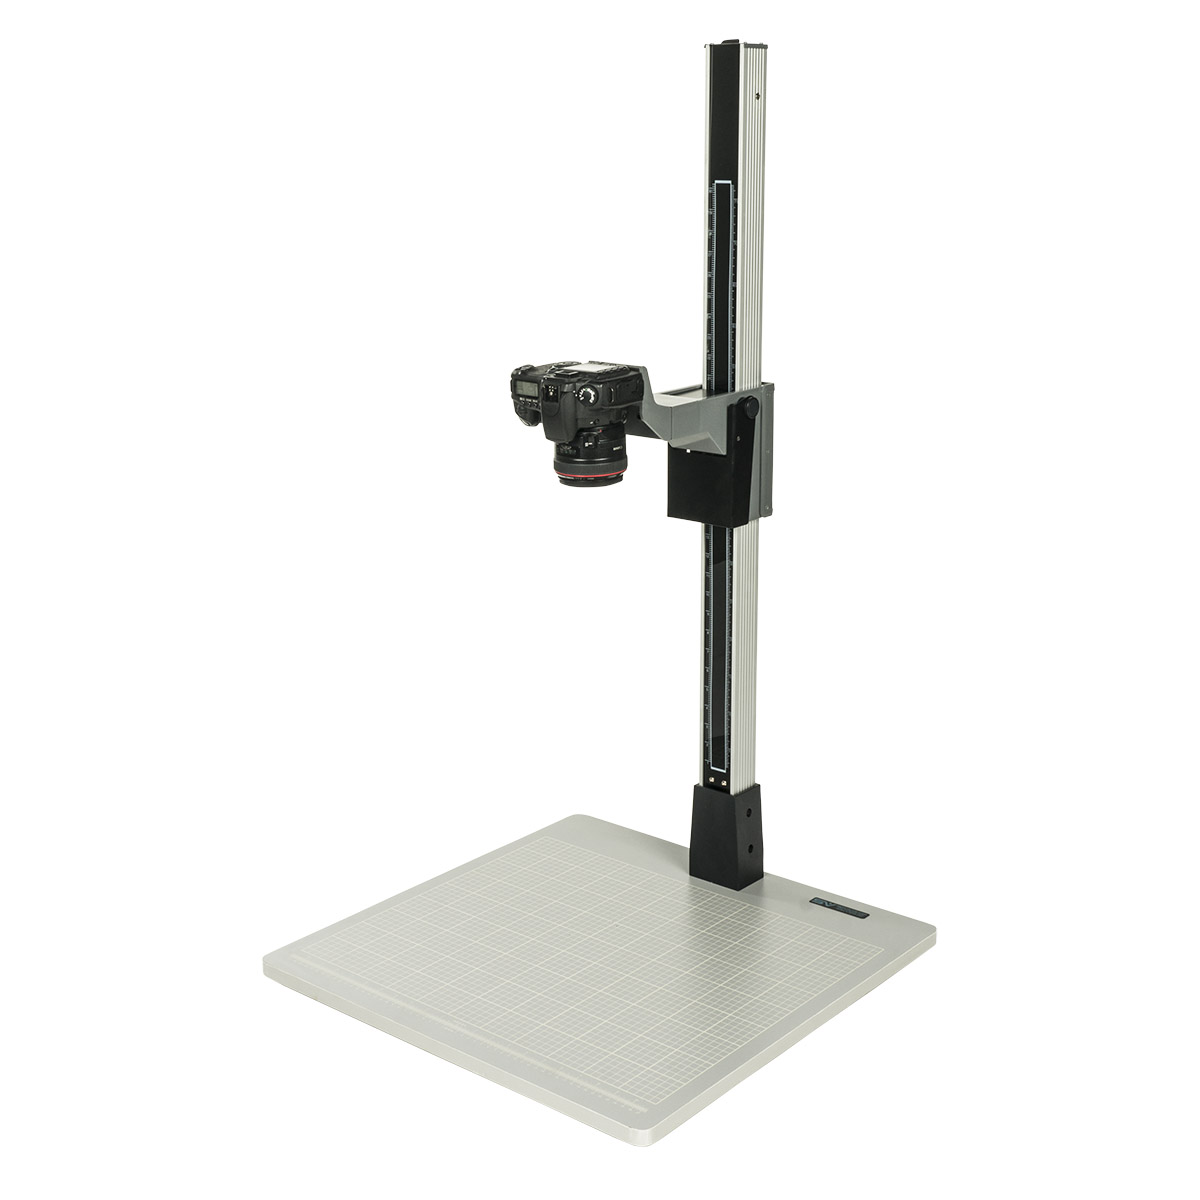 LPL copy stand Copy stand CS-A4 L18142 for A4 B5 size No light With base plate 